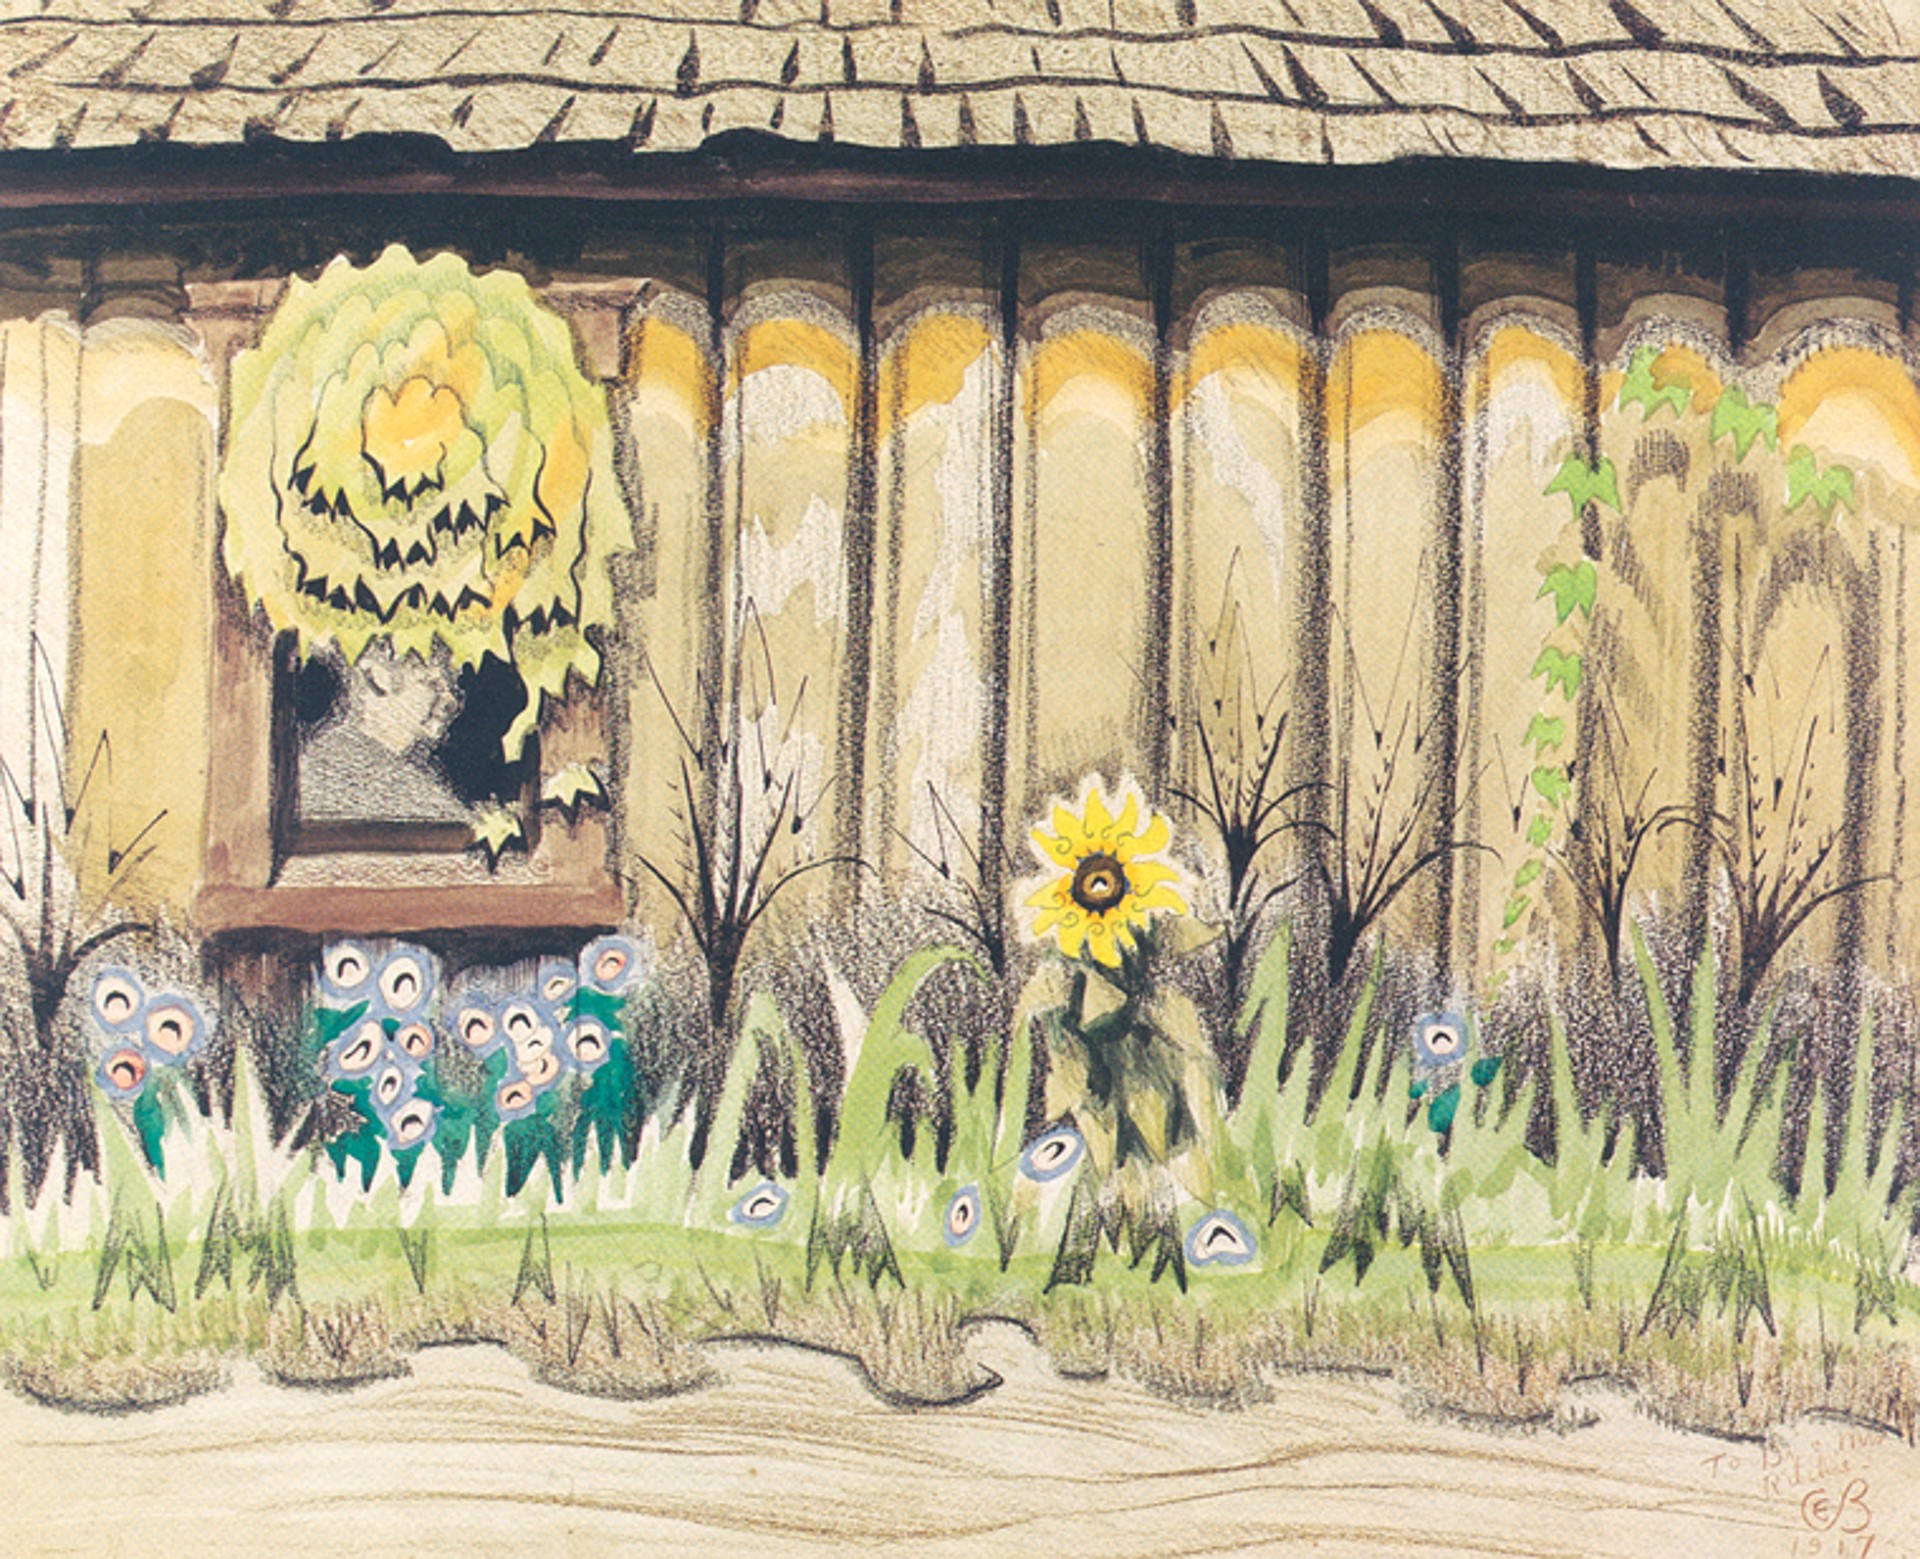 The Window by the Alley by Charles Burchfield